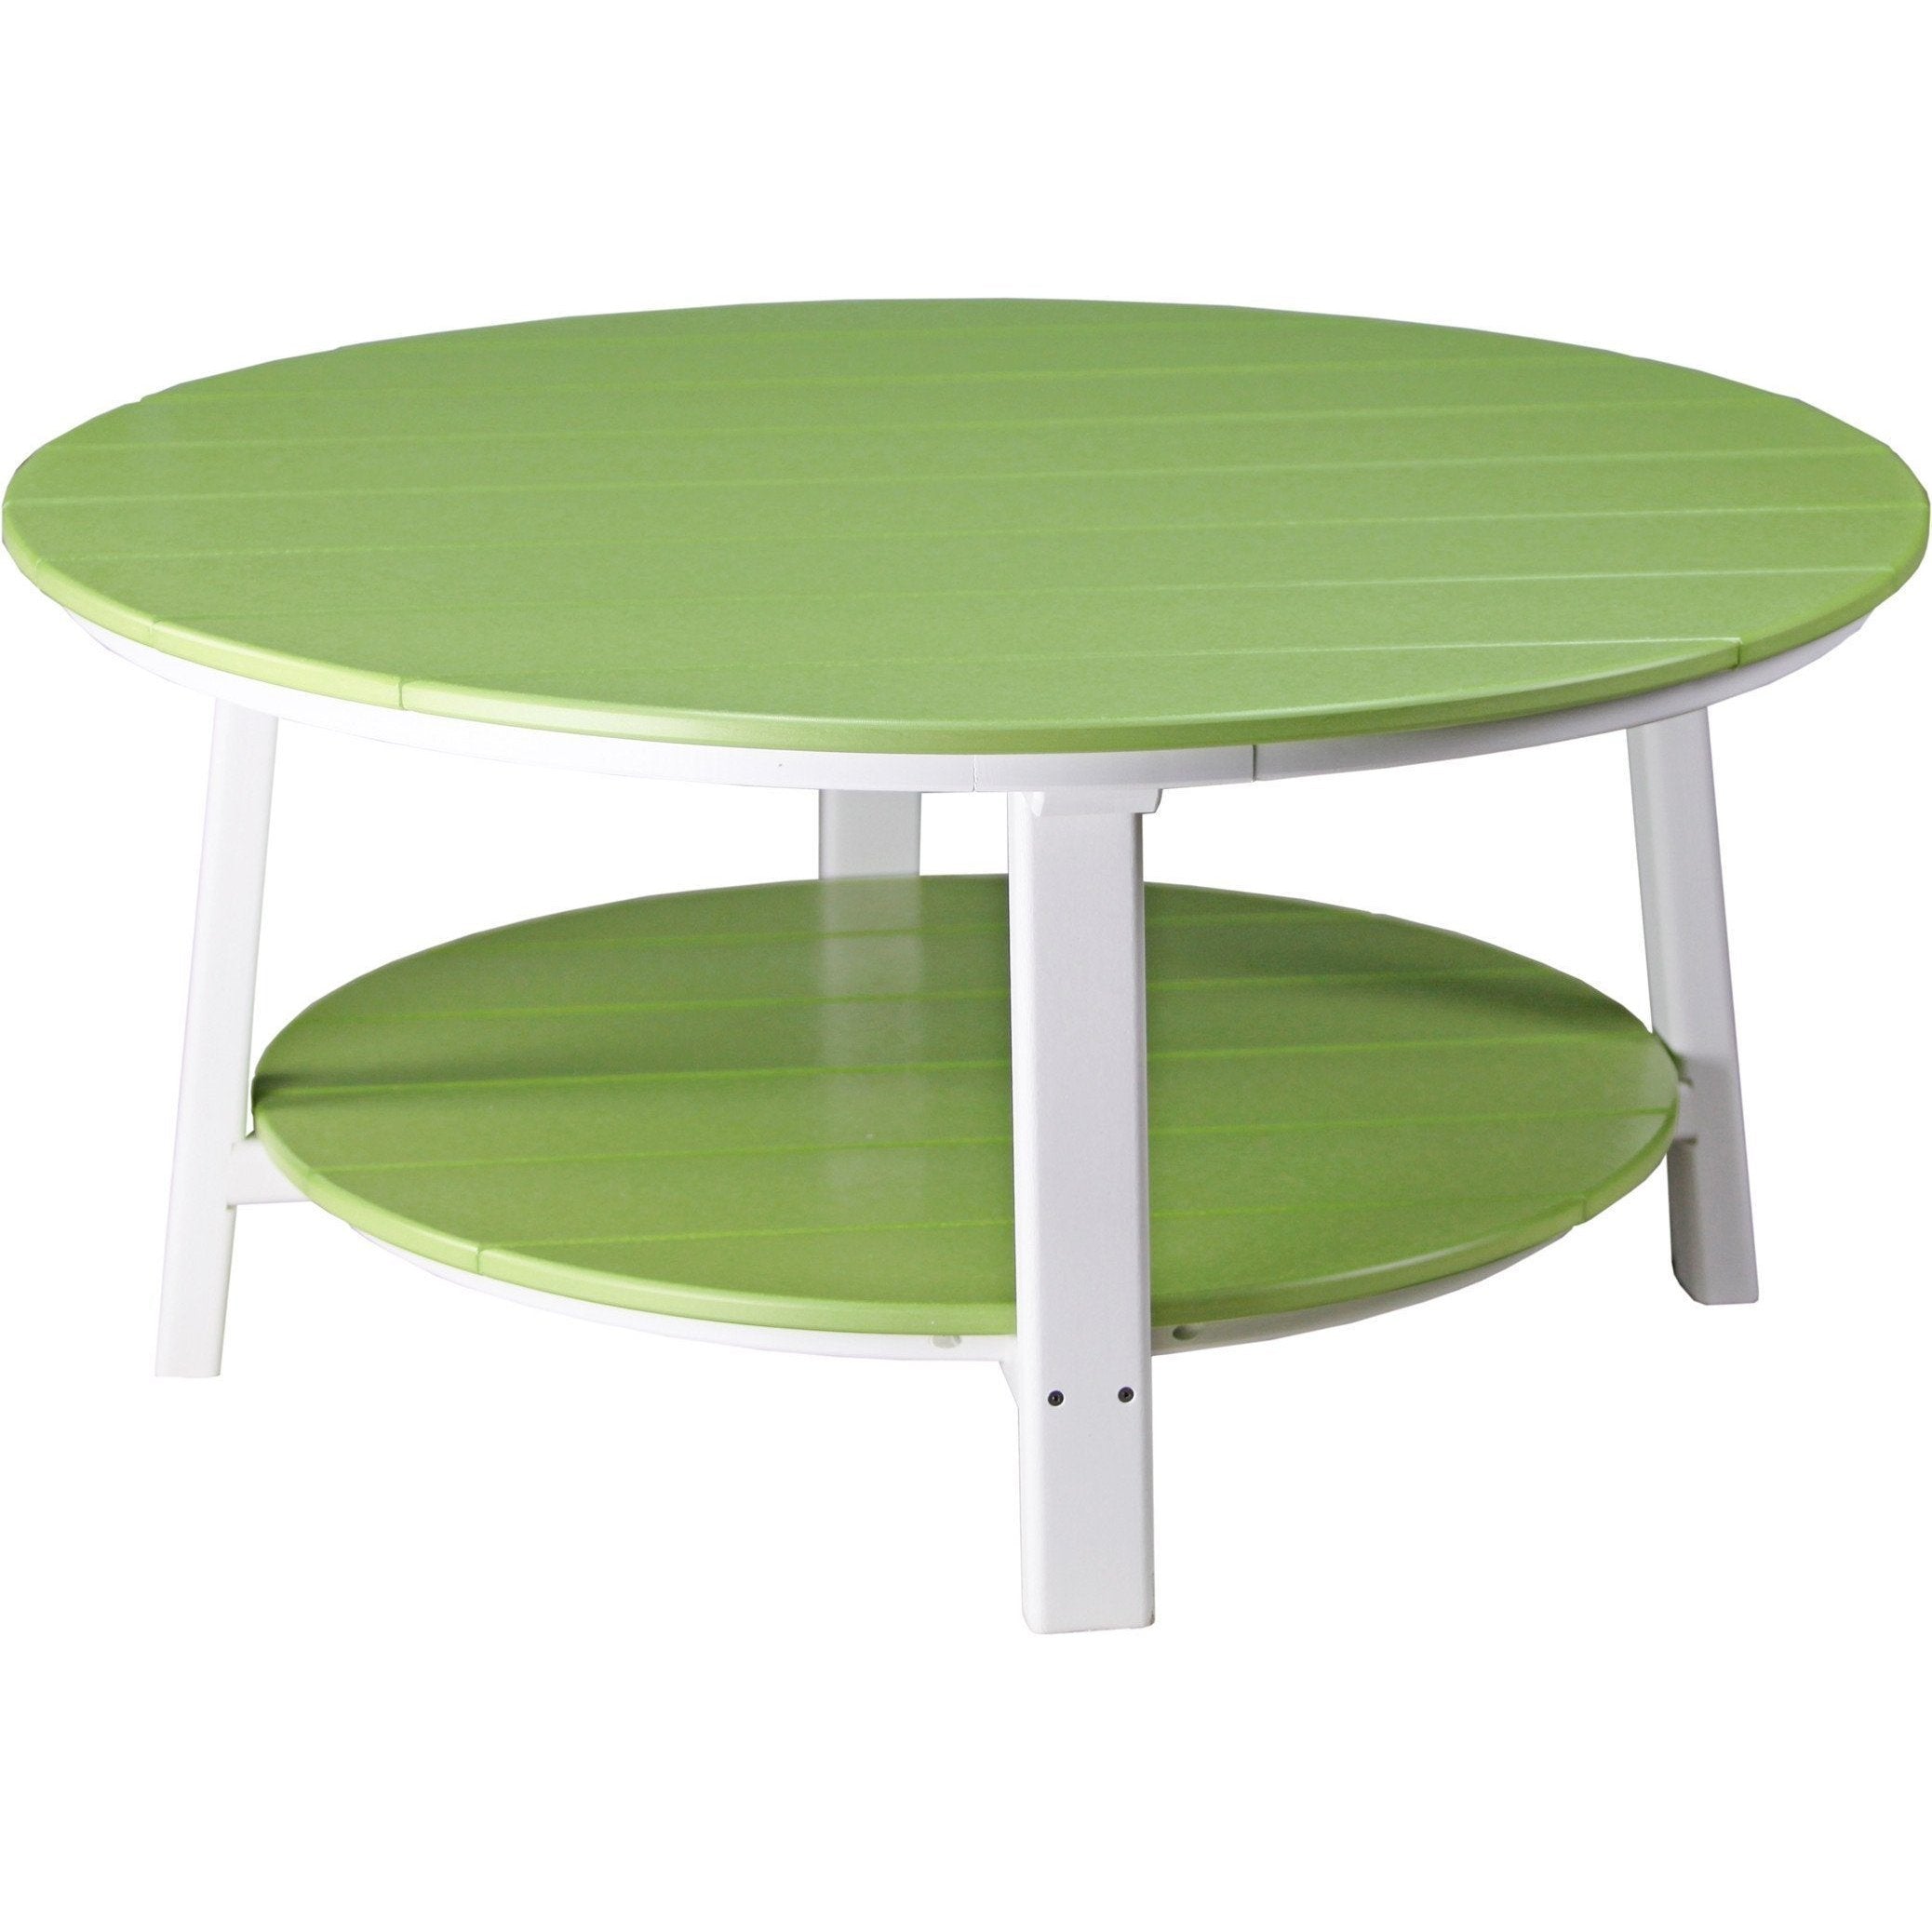 Outdoor Deluxe Conversation Table Lime Green & White